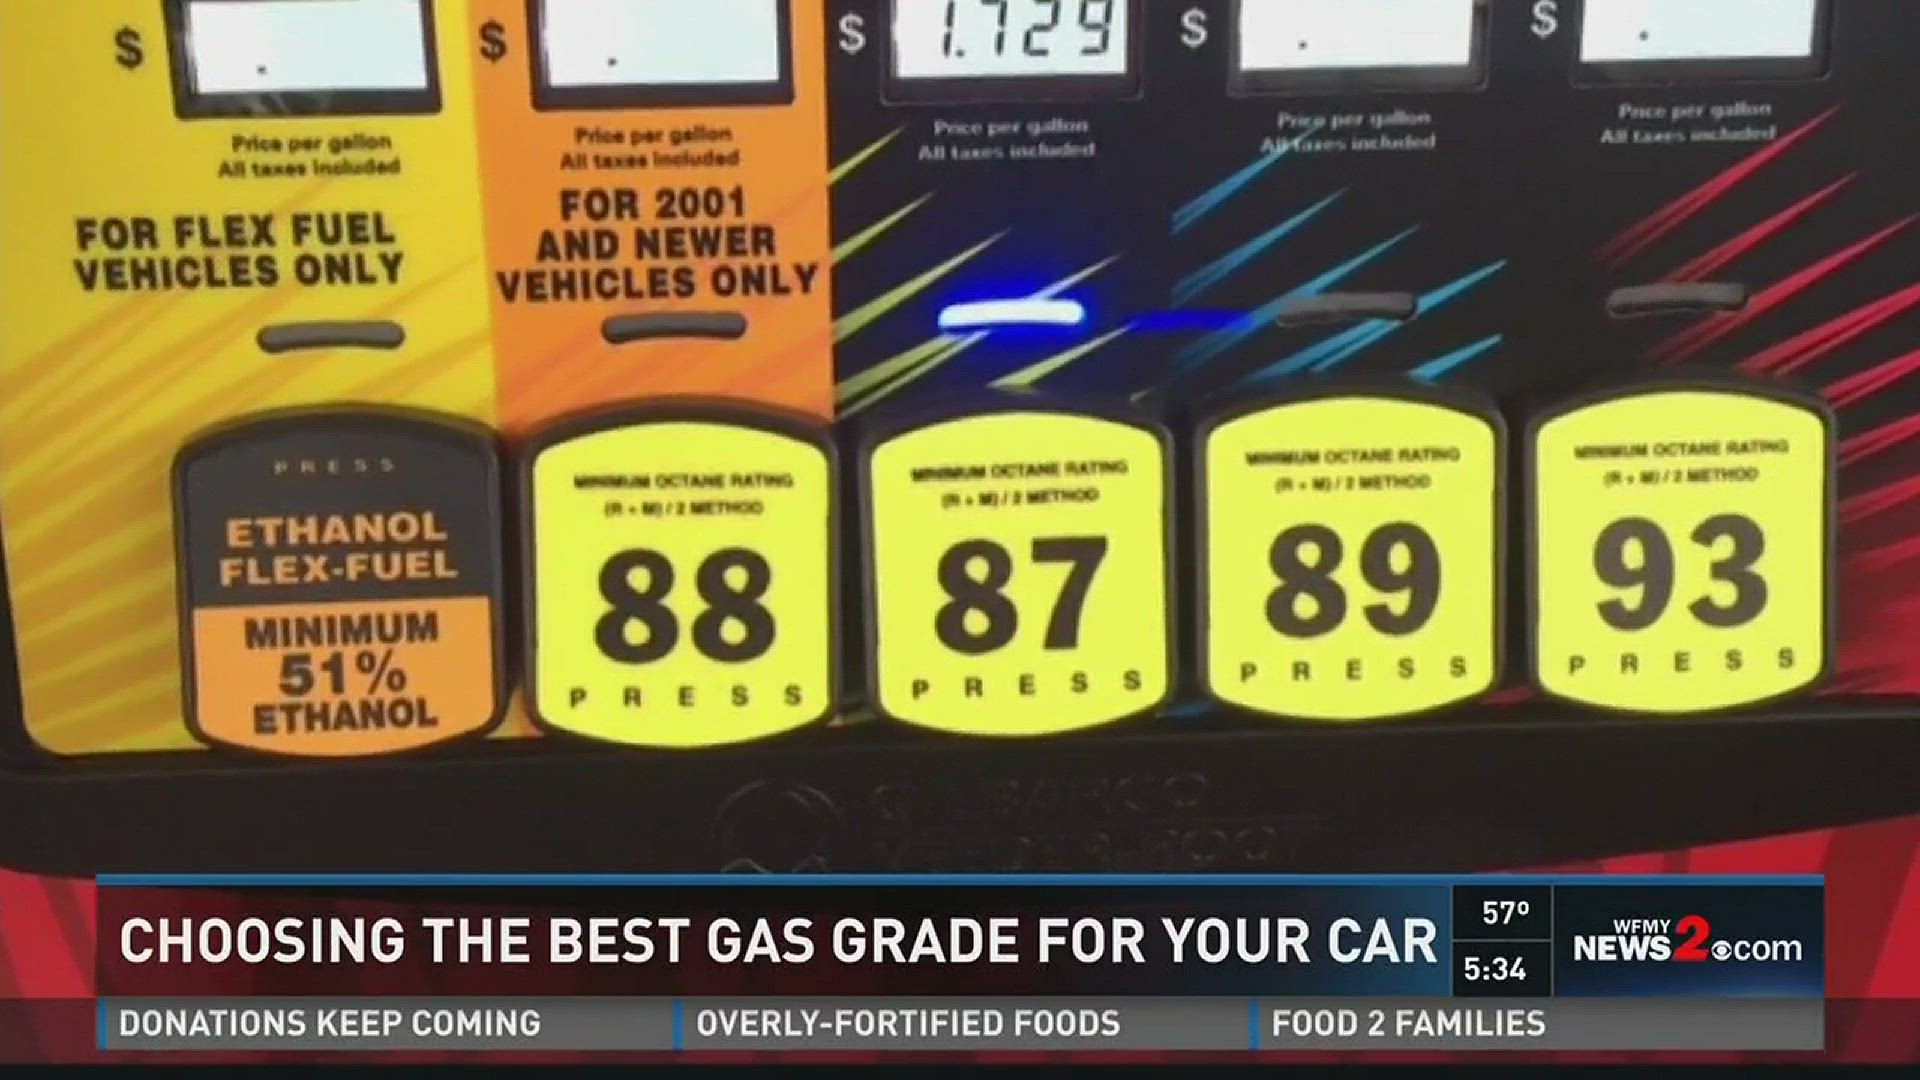 And should you "treat" your car to a higher octane once a month? 2 Wanted to Know.